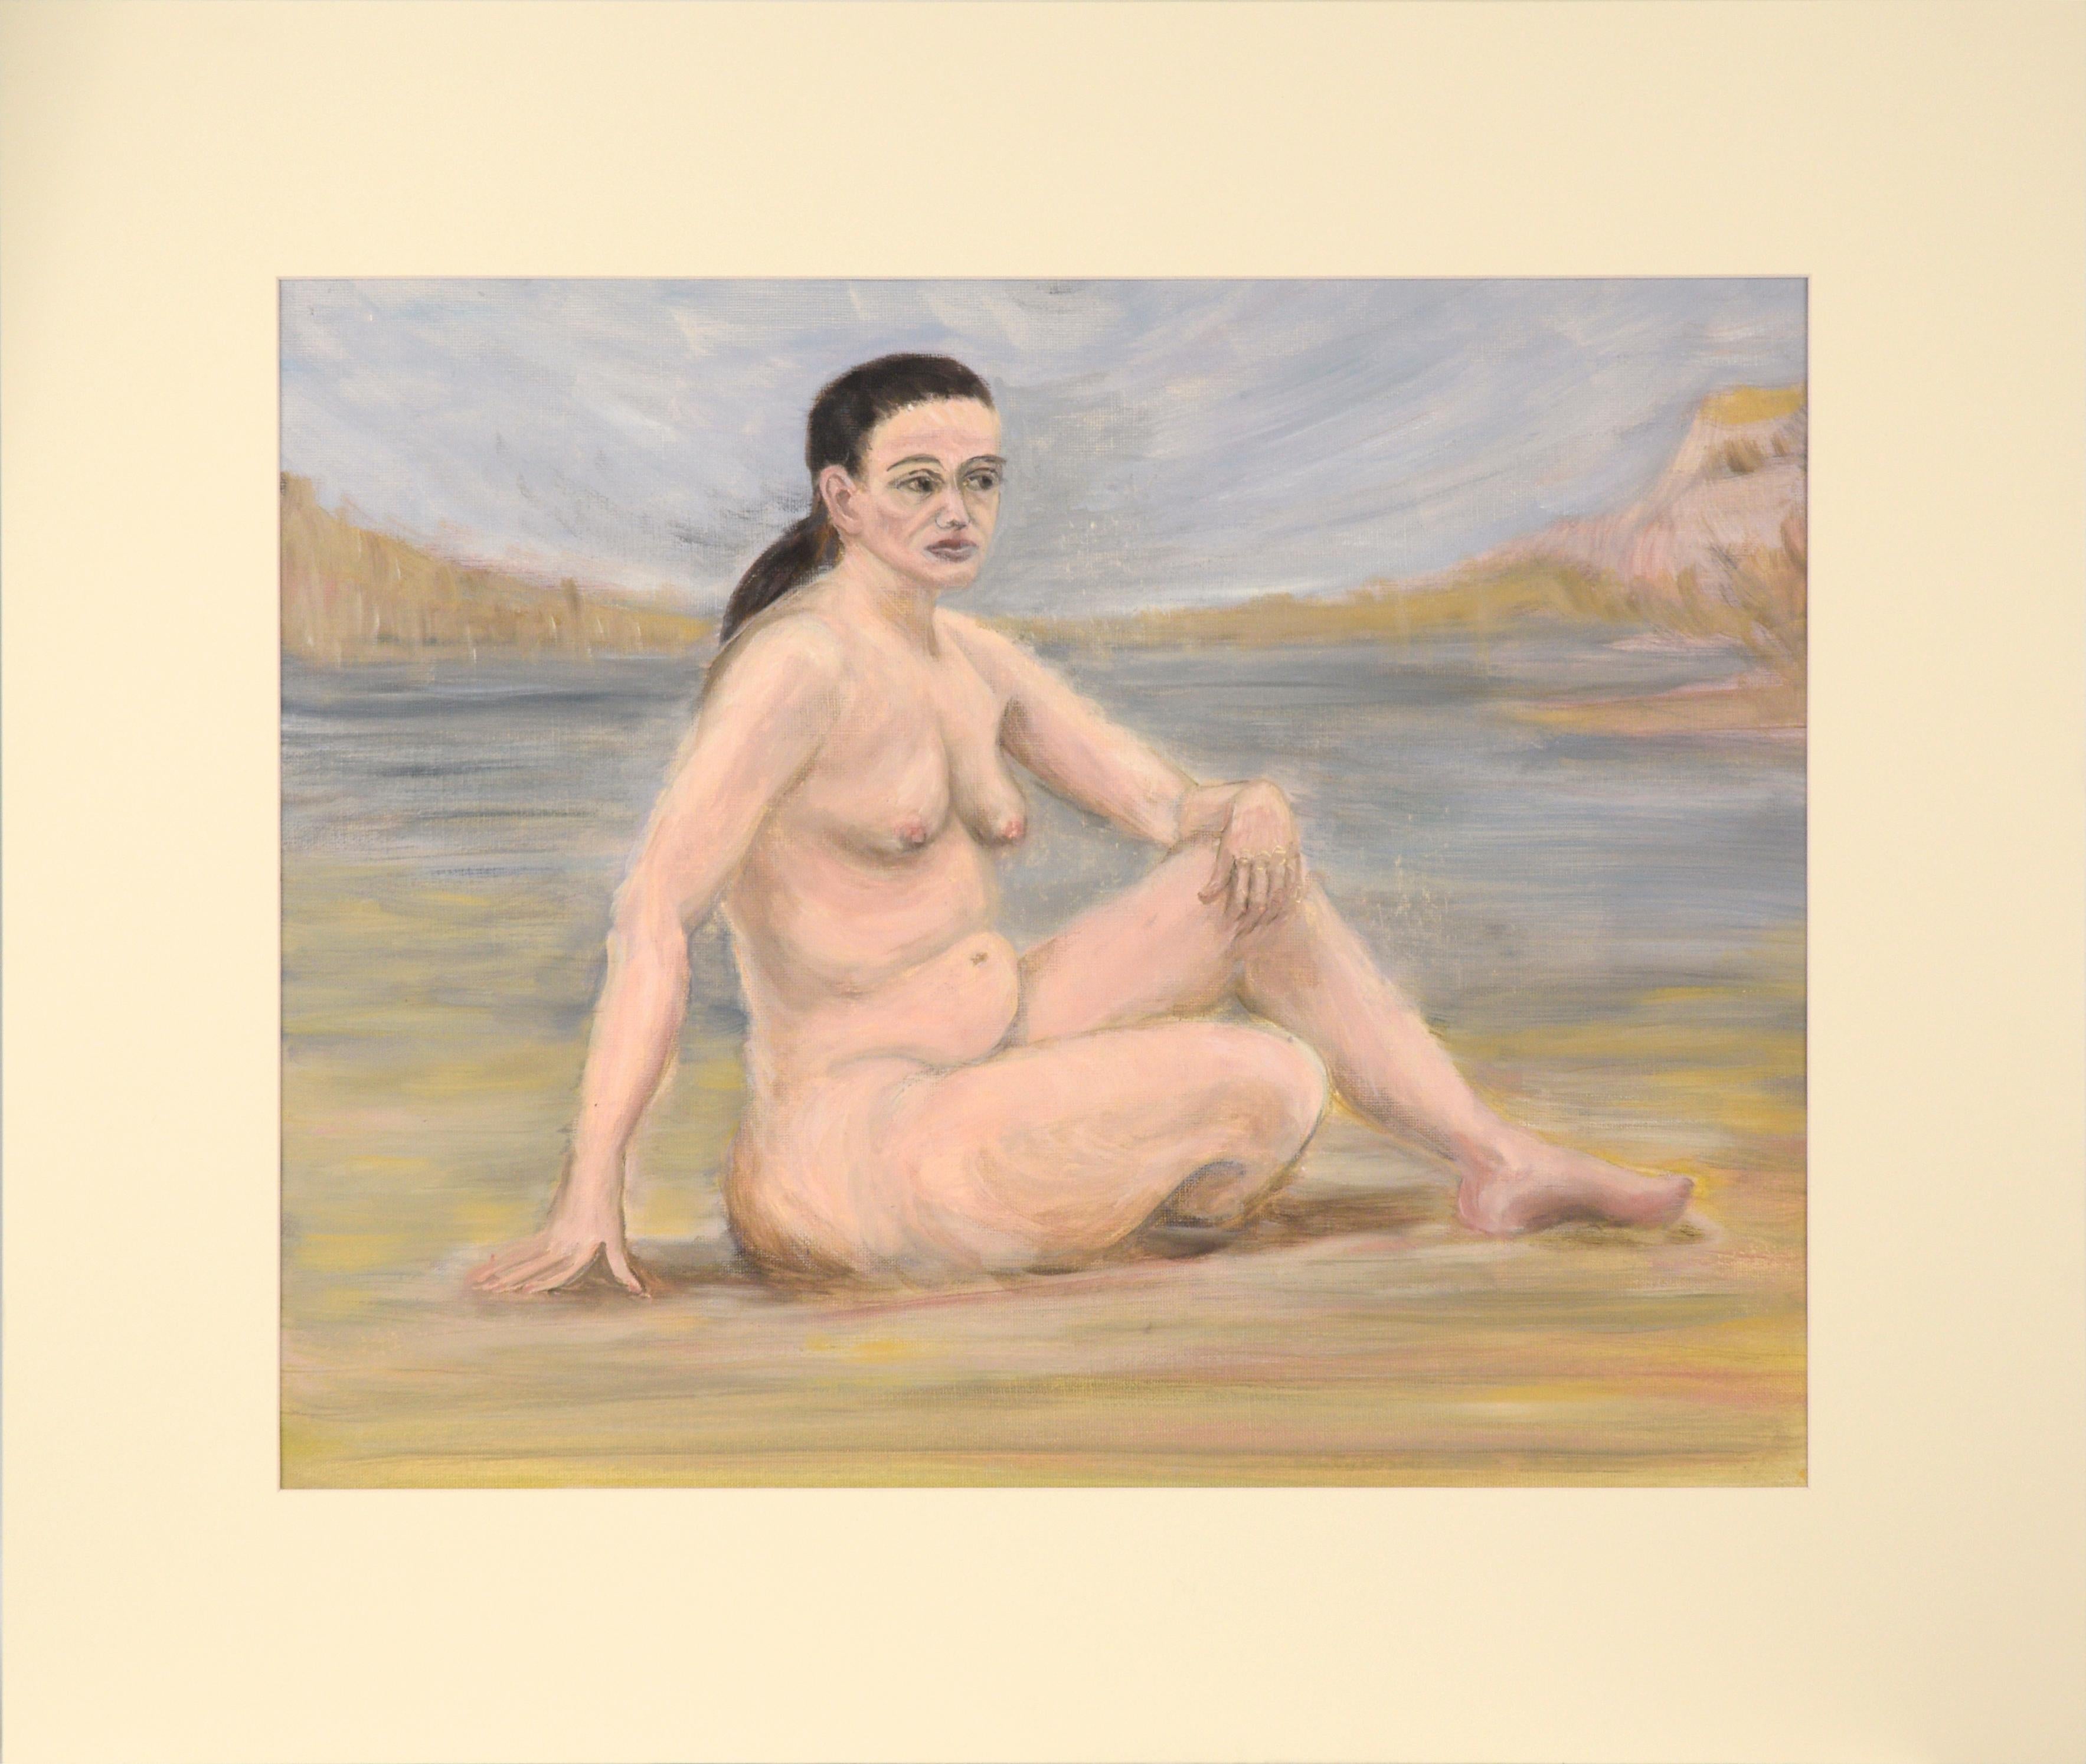 Genevieve Rogers Figurative Painting - Woman at the Lake, Mid Century Bay Area Nude Figure Study 